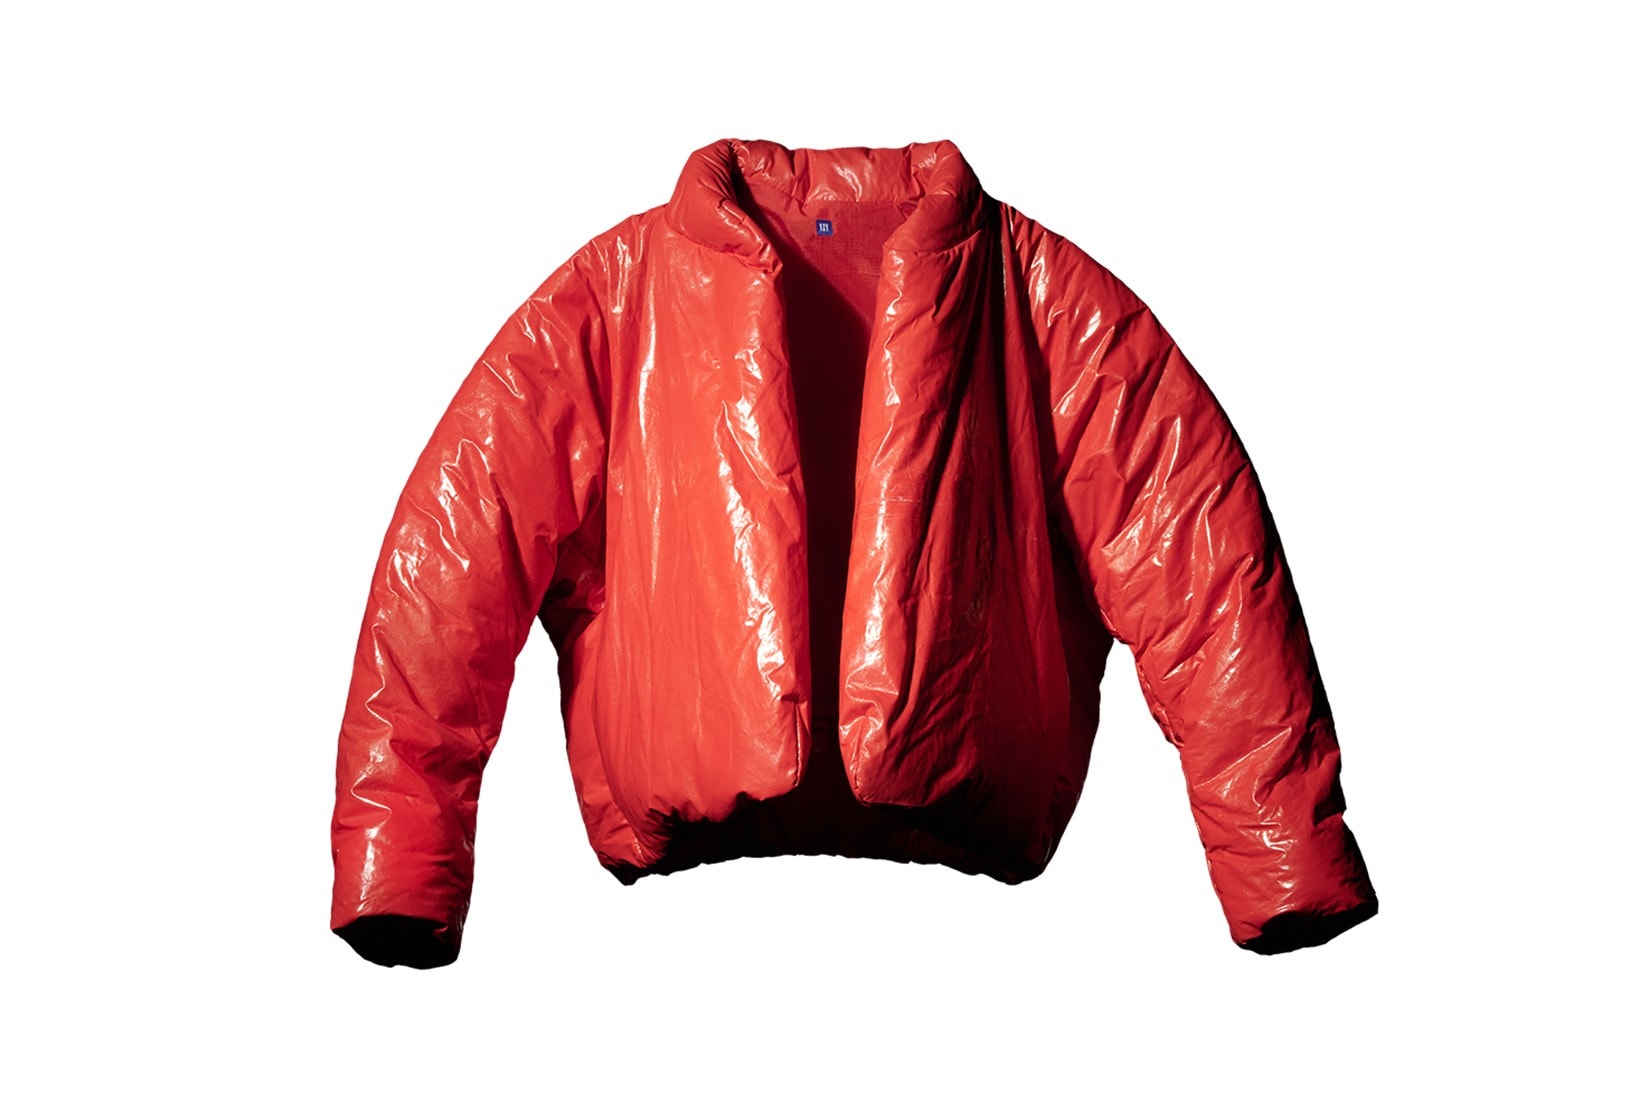 yeezy gap global launch round jacket puffer red blue black 